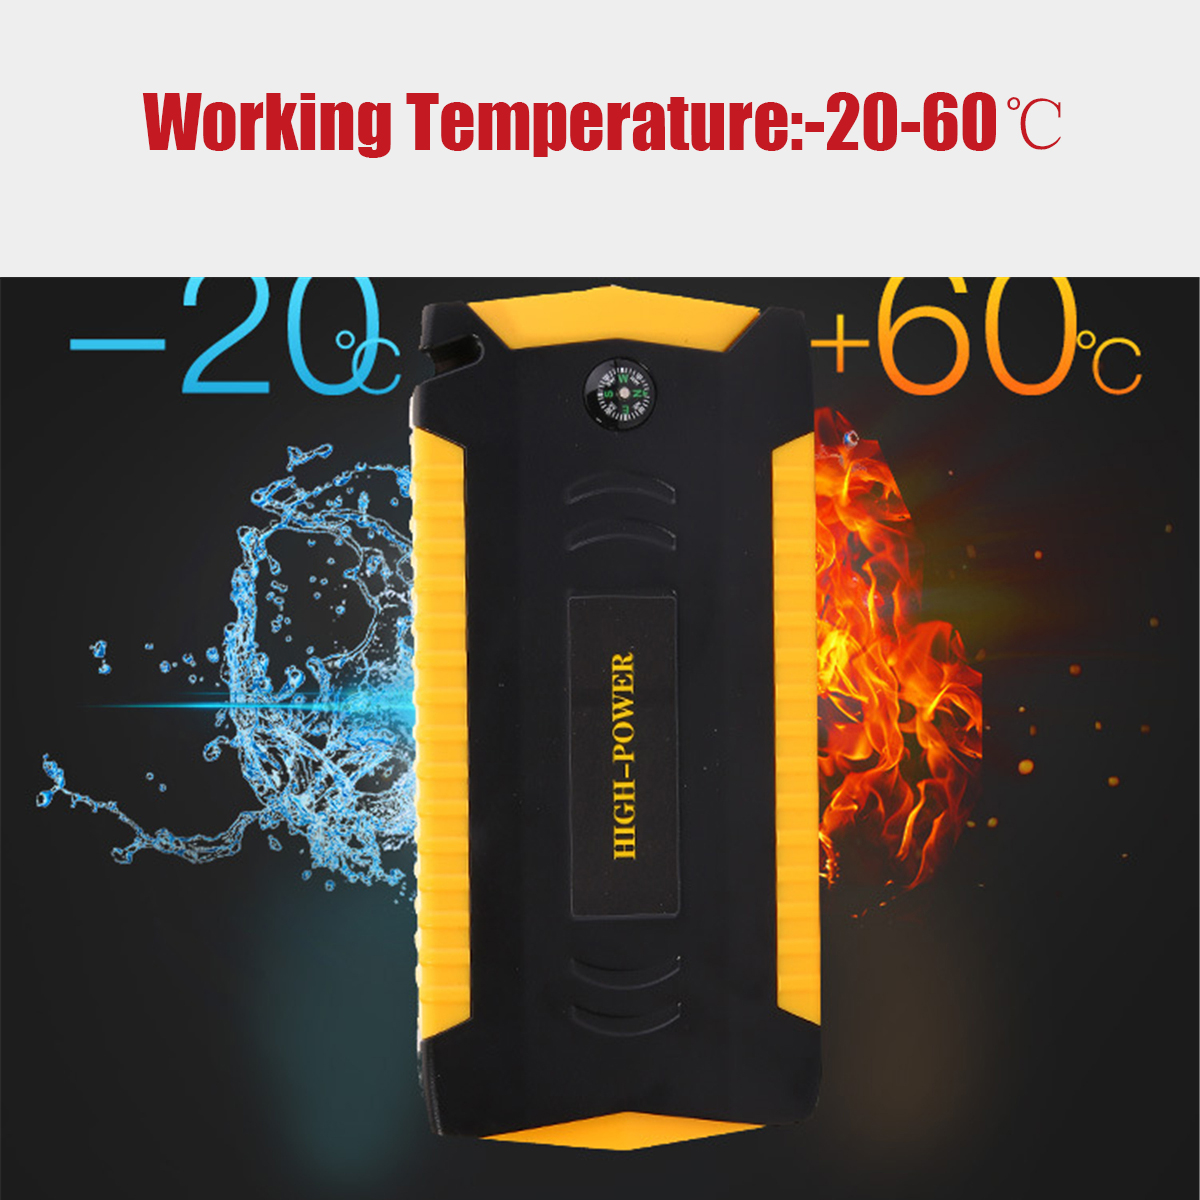 Dispaly 89800mAh Car Jump Starter Booster 4USB SOS Emergency Charger Battery 